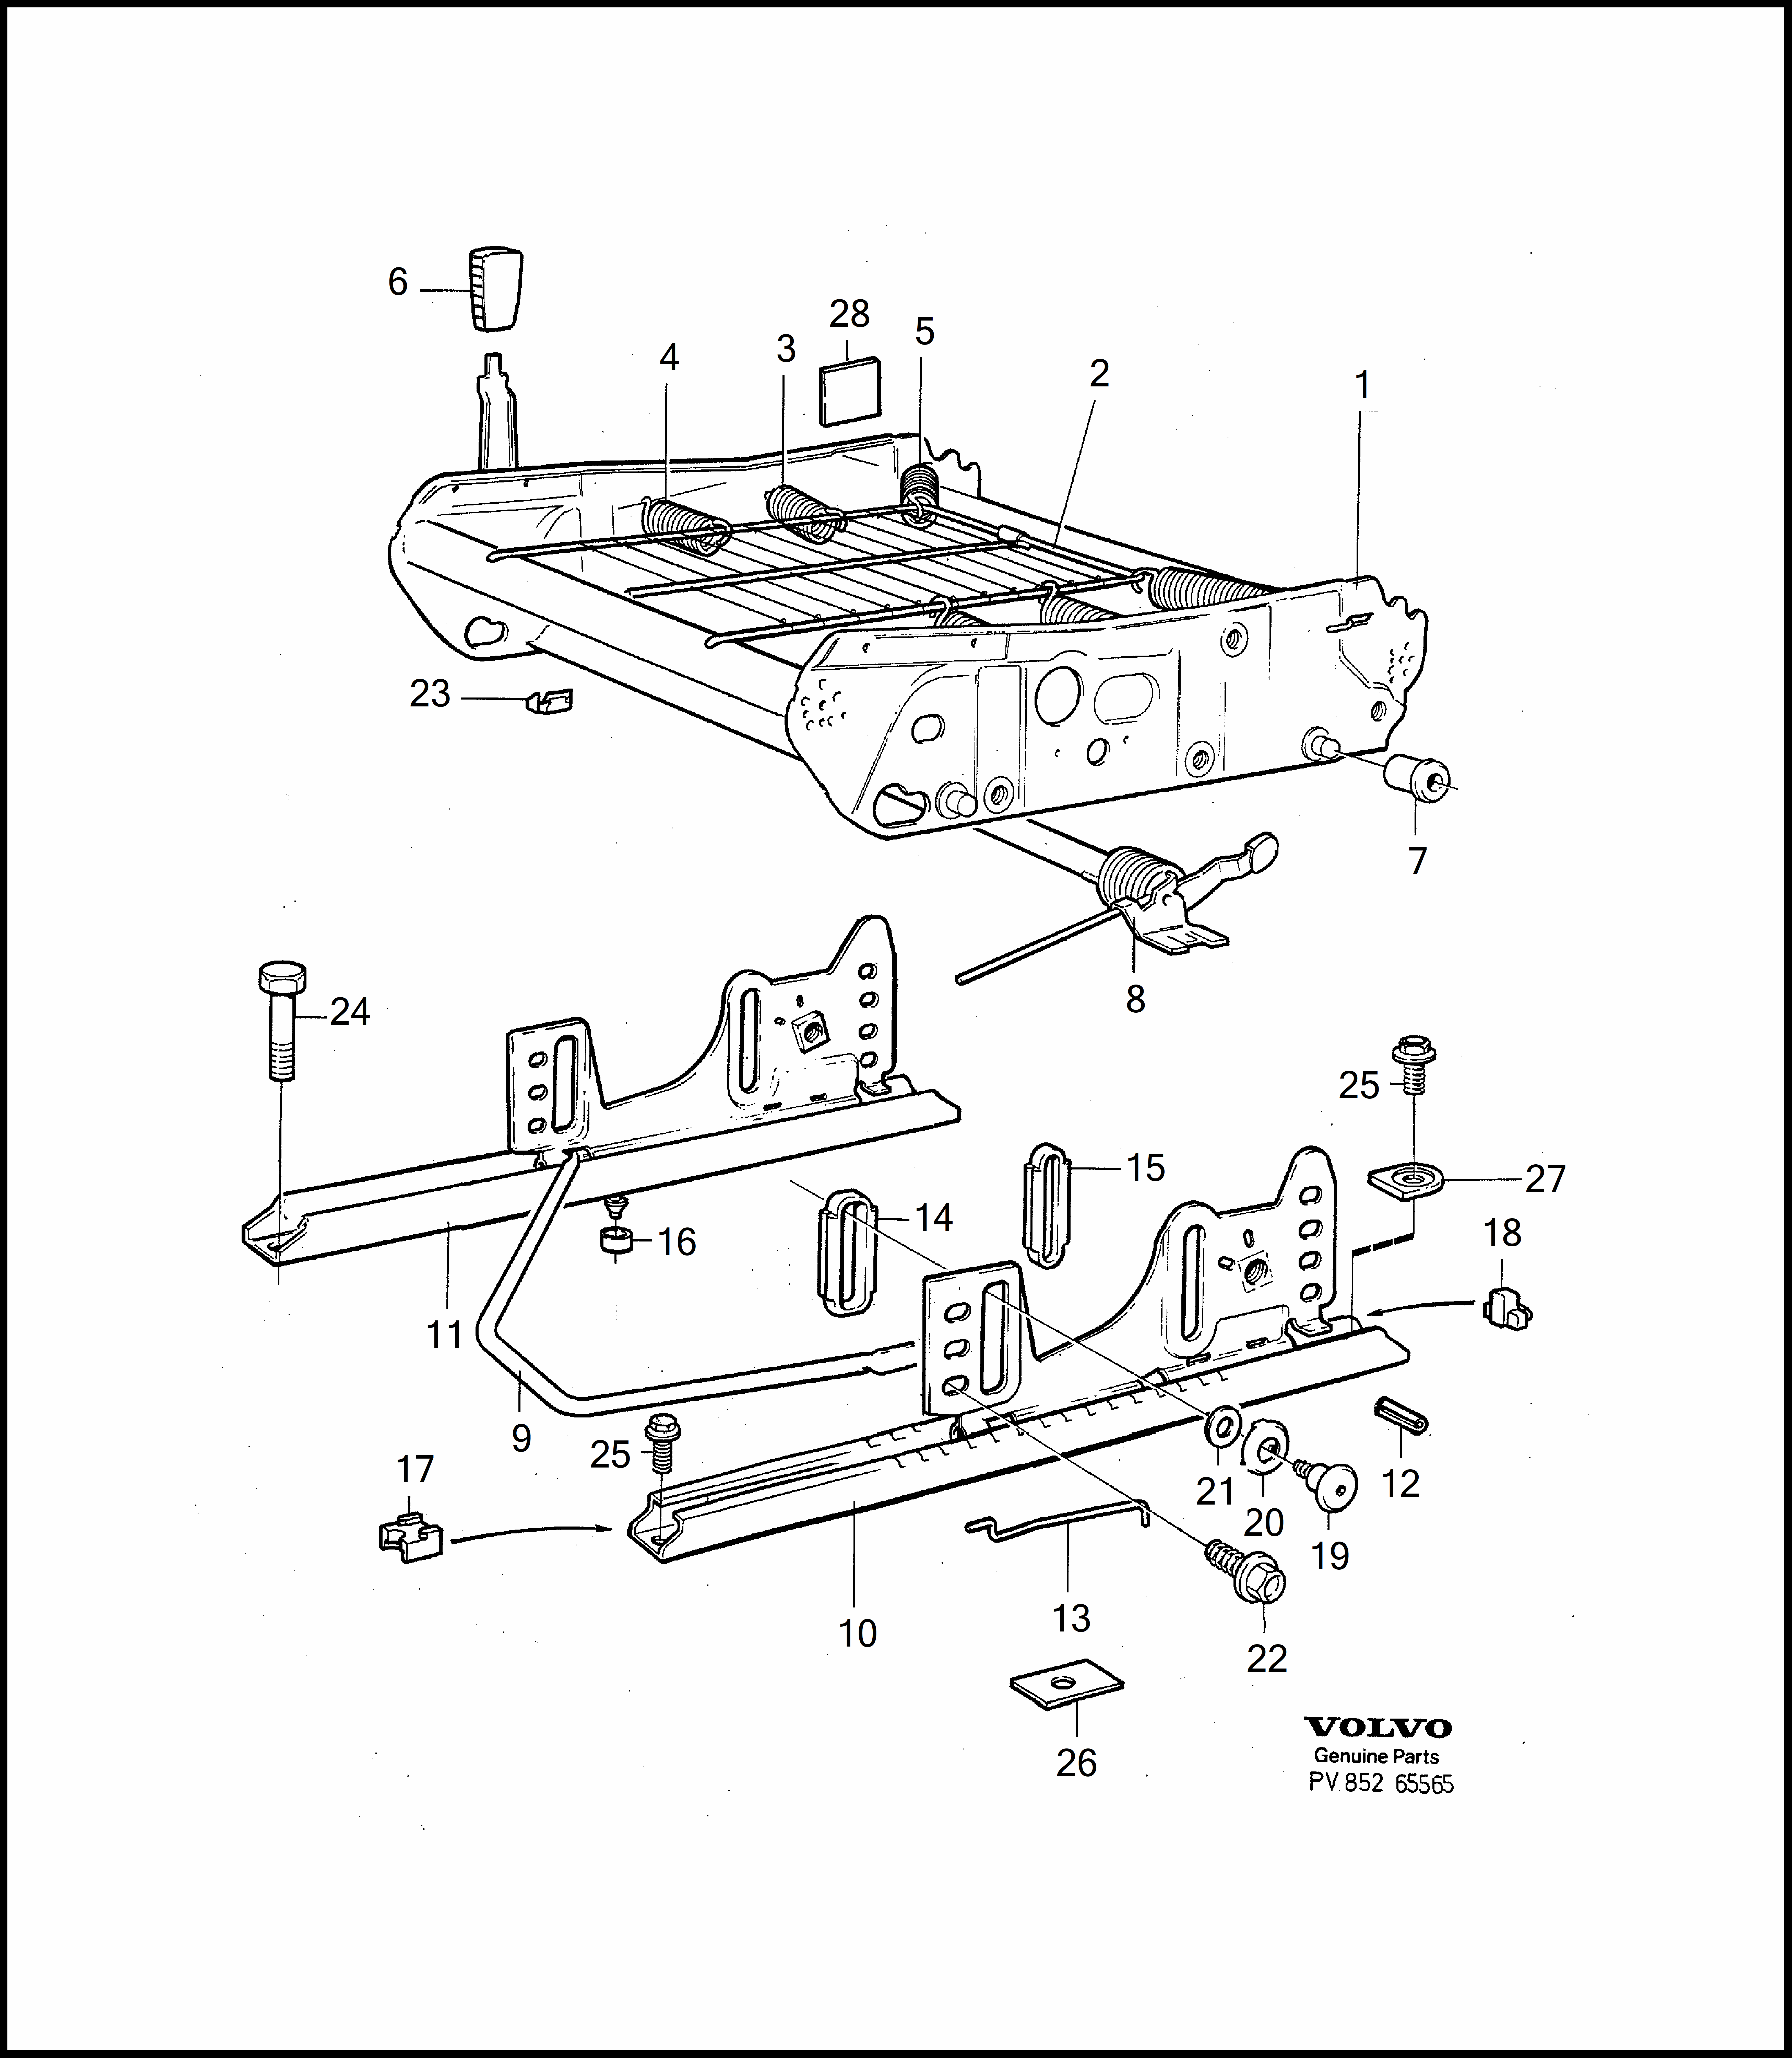 subframe for seat, manual adjustment for Volvo 960 960